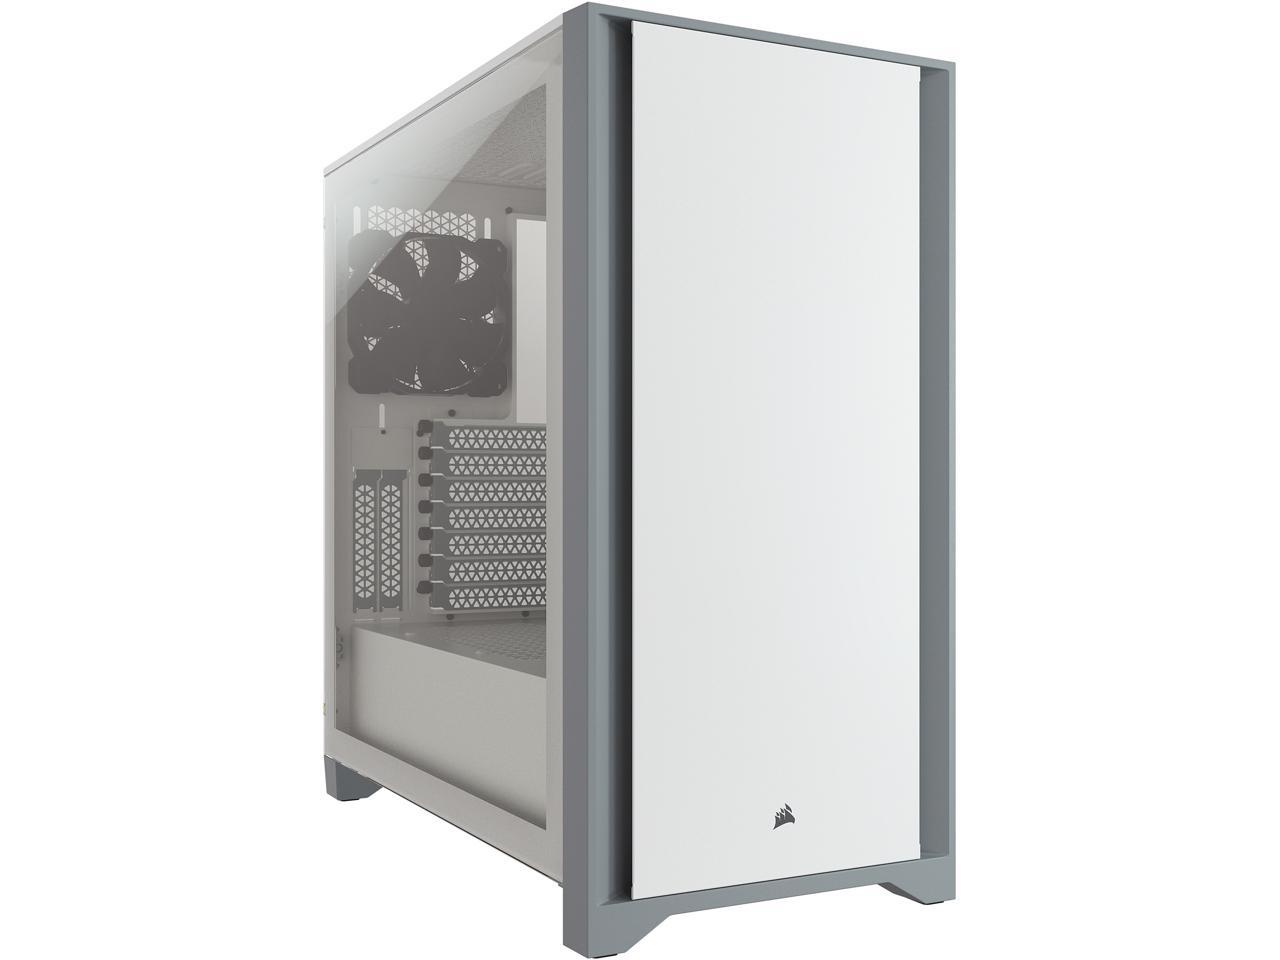 Corsair 4000D Tempered Glass Mid-Tower ATX PC Case White $60 at Woot